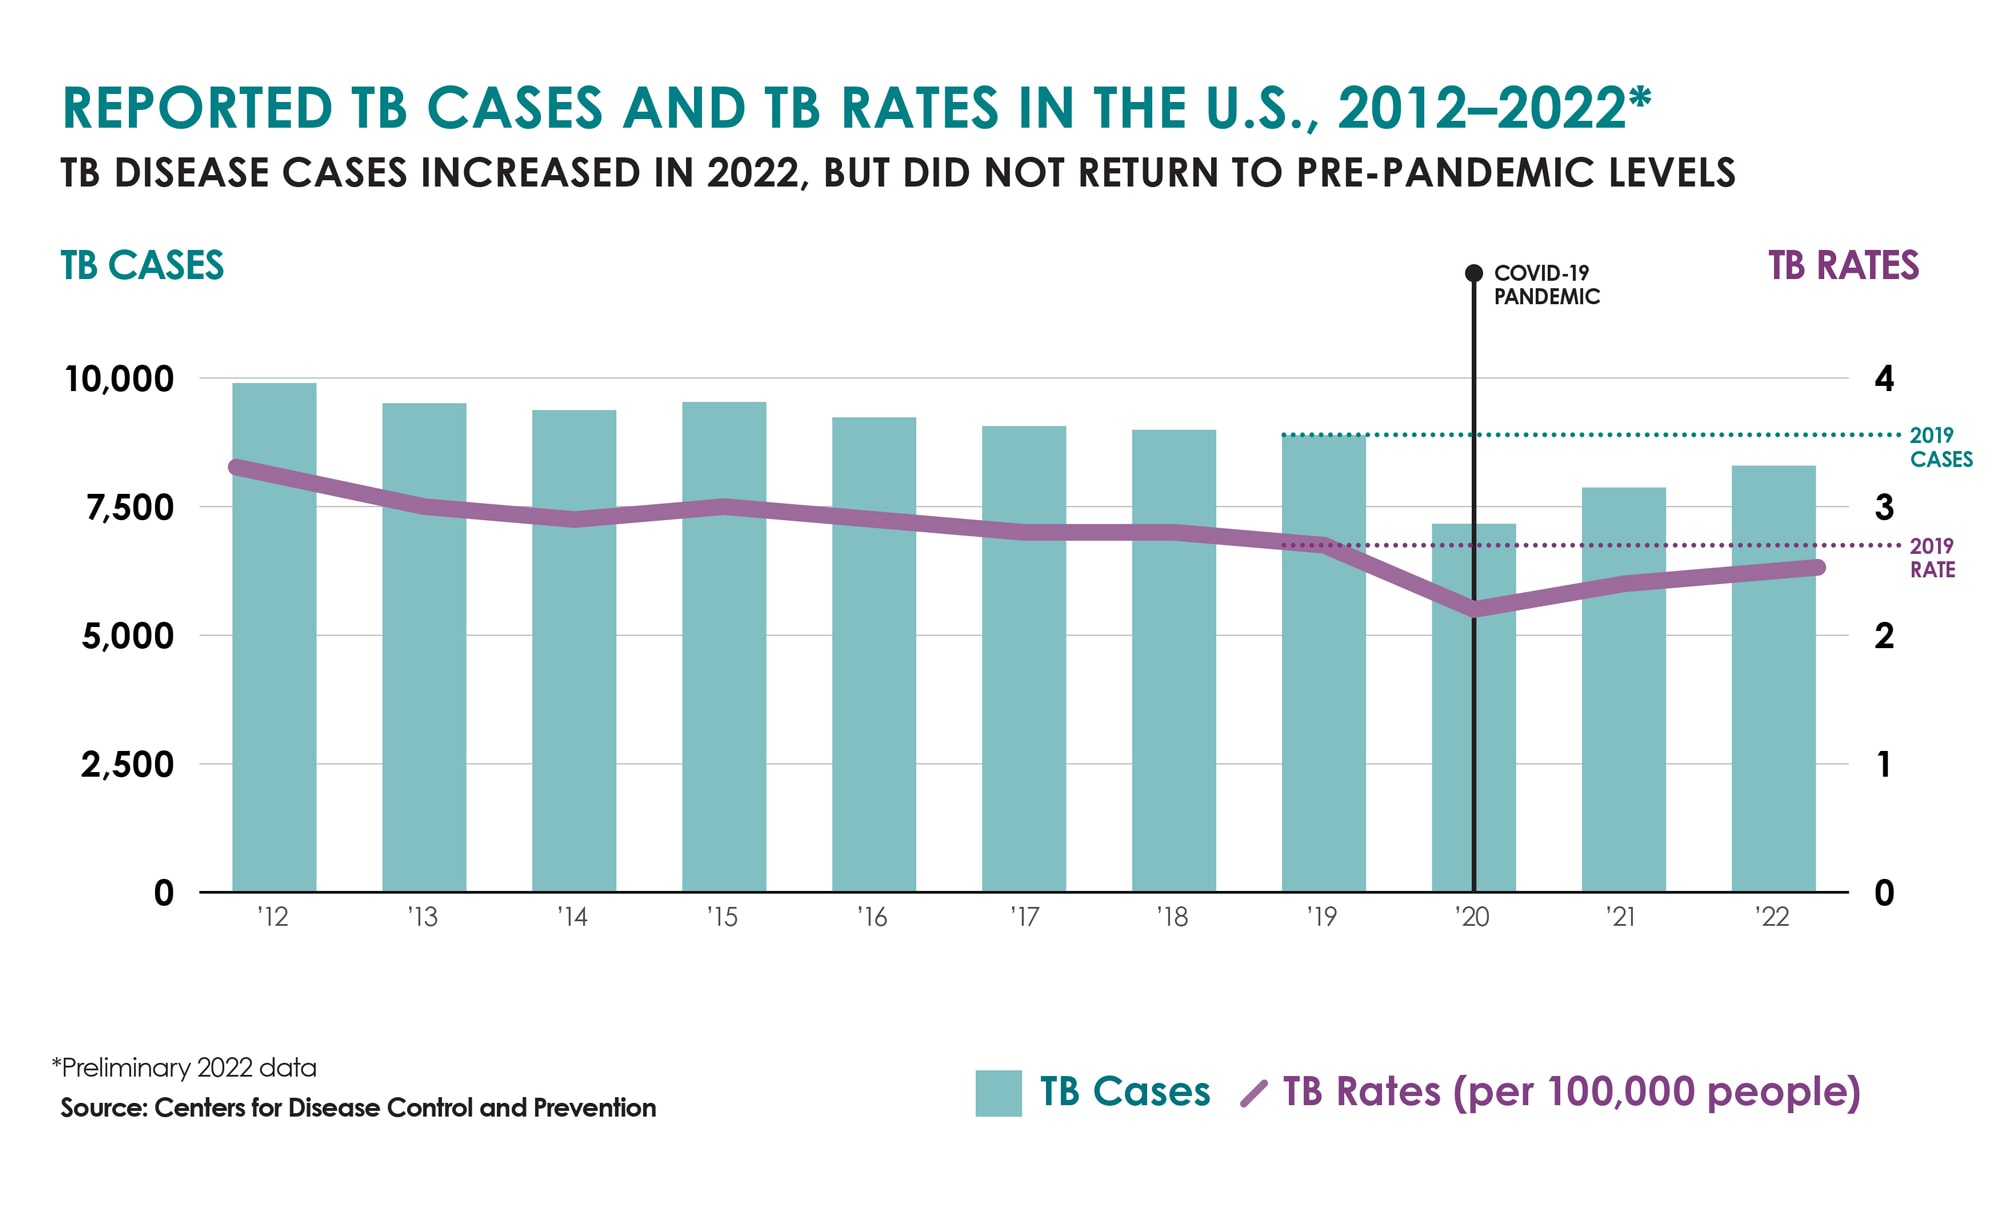 A combined bar and line chart showing TB cases and rates from 2012 to 2022, with both dropping in 2020 and rebounding to just below pre-pandemic (2019) levels in 2022.